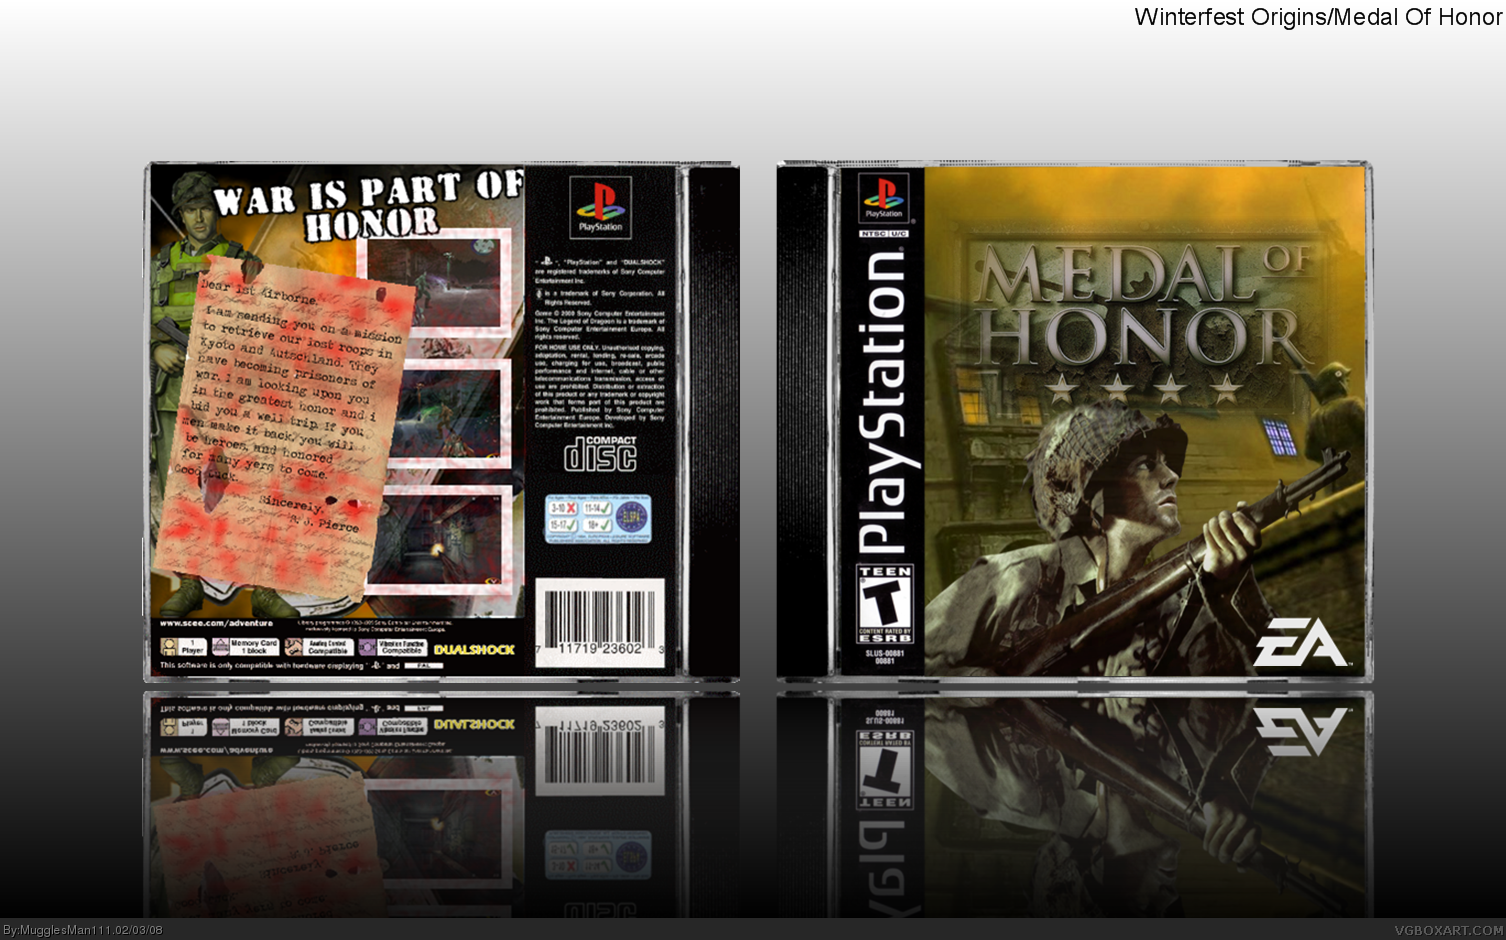 Medal Of Honor box cover